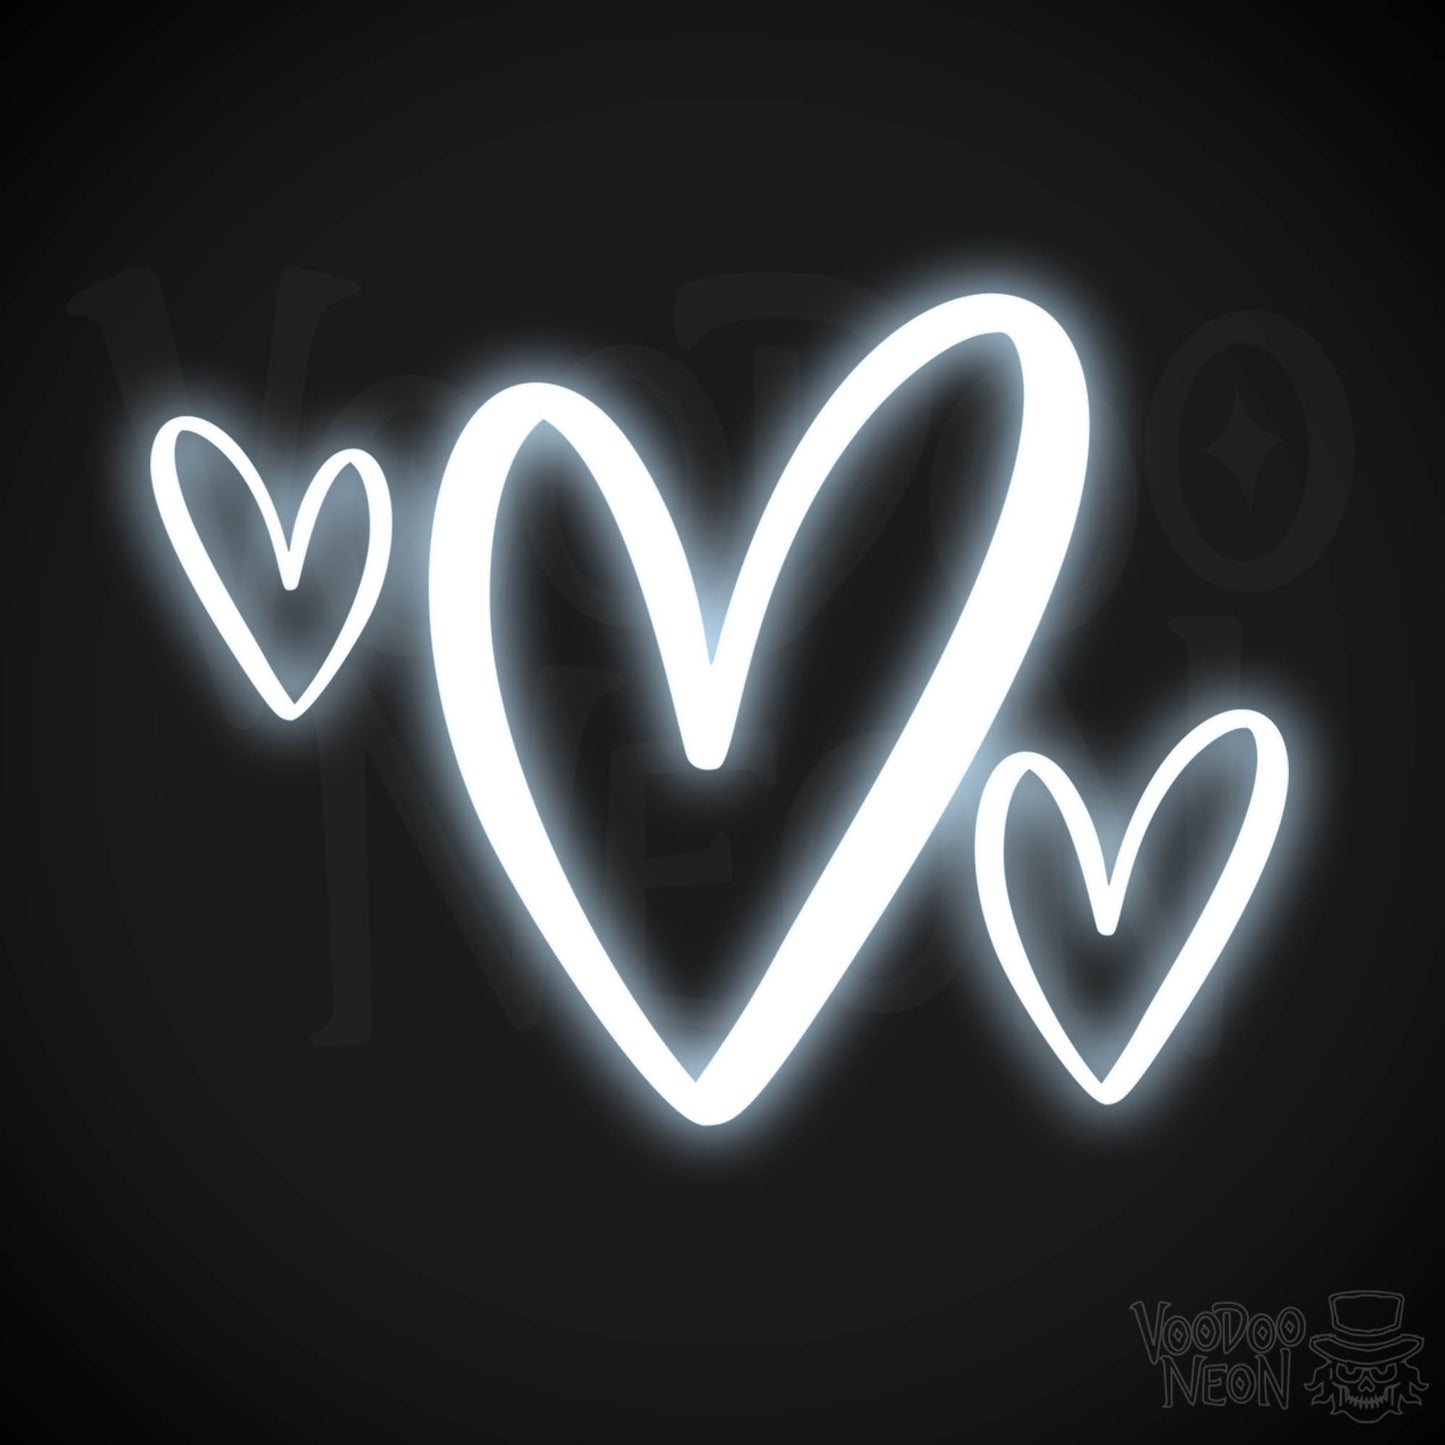 Neon Love Heart - Love Heart Neon Sign - LED Wall Art - Color Cool White